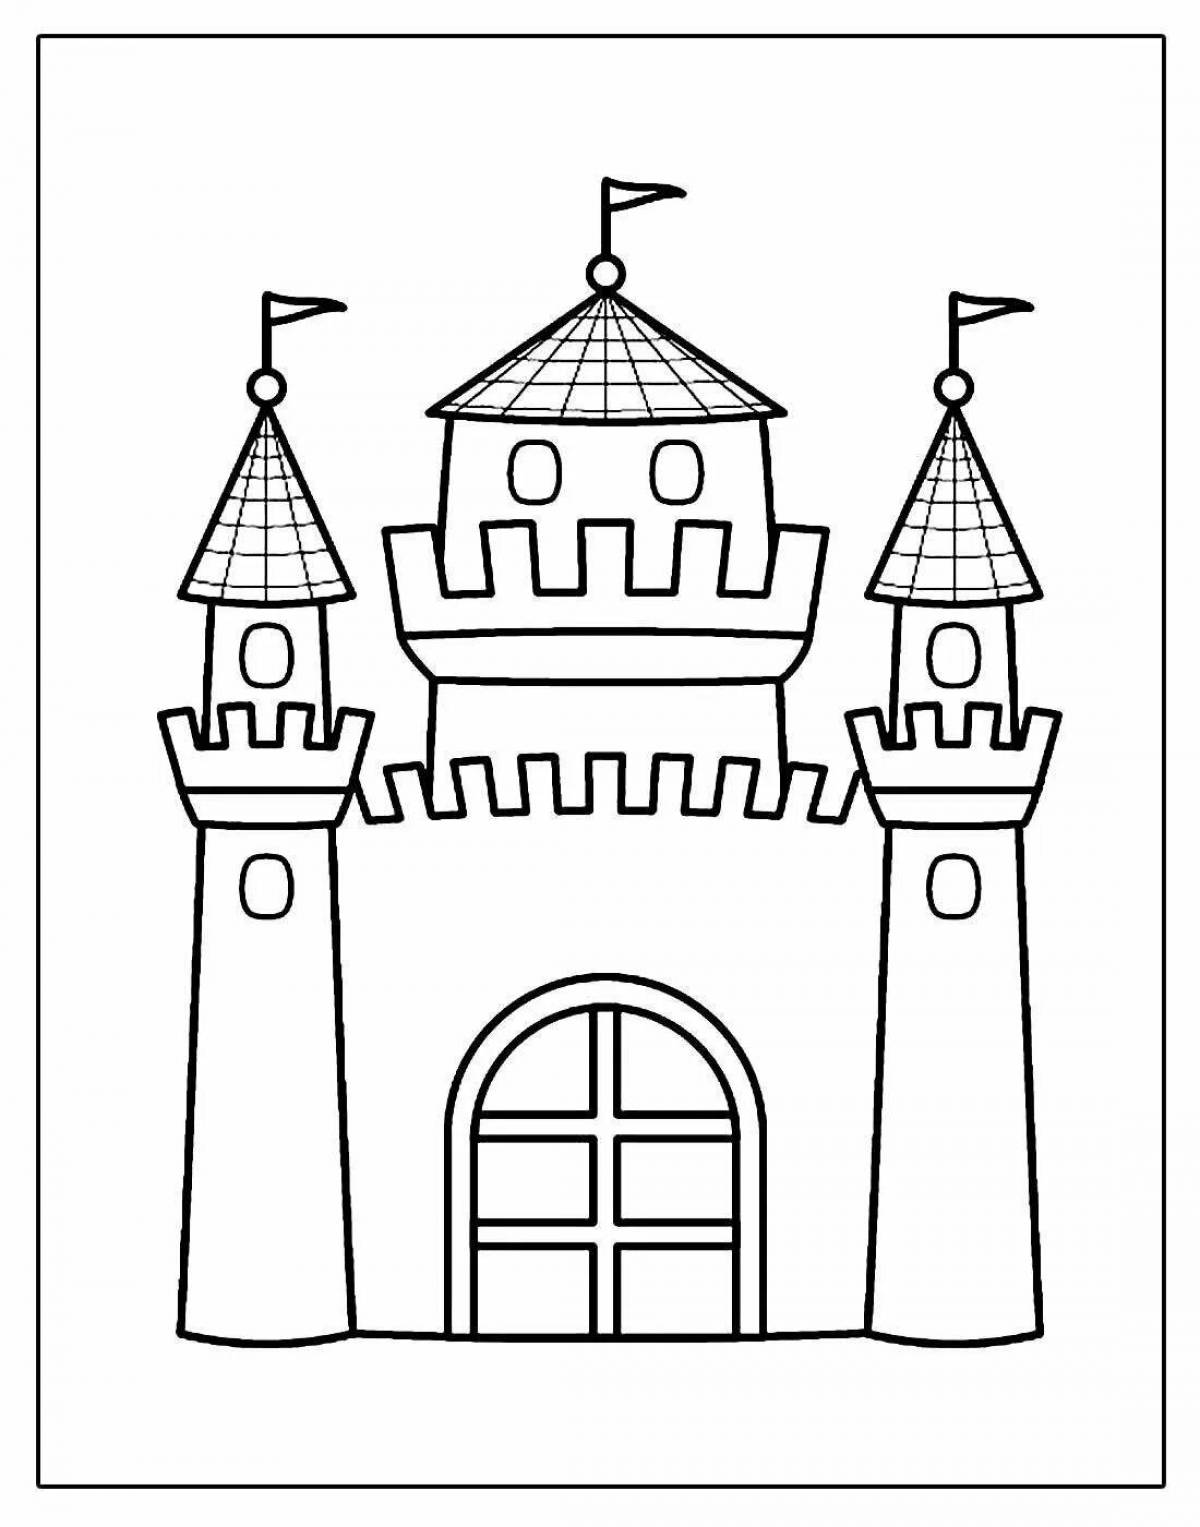 Cute castle coloring book for 4-5 year olds